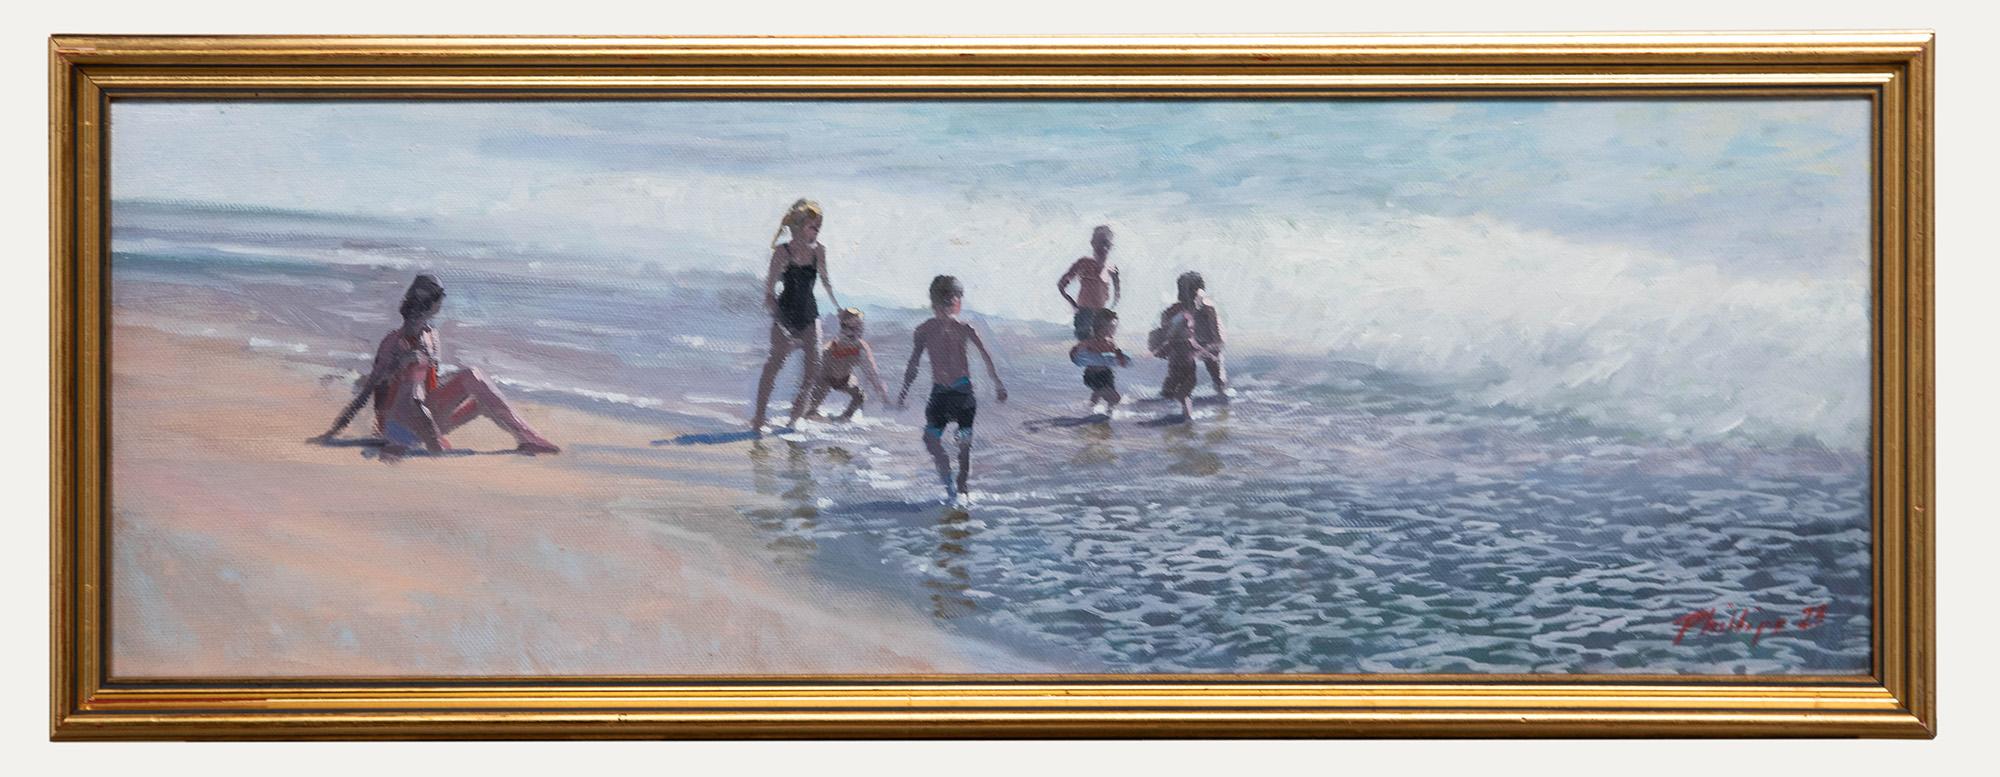 Peter Phillips Figurative Painting - Peter Z. Phillips - Framed Contemporary Oil, Jumping Sea Waves